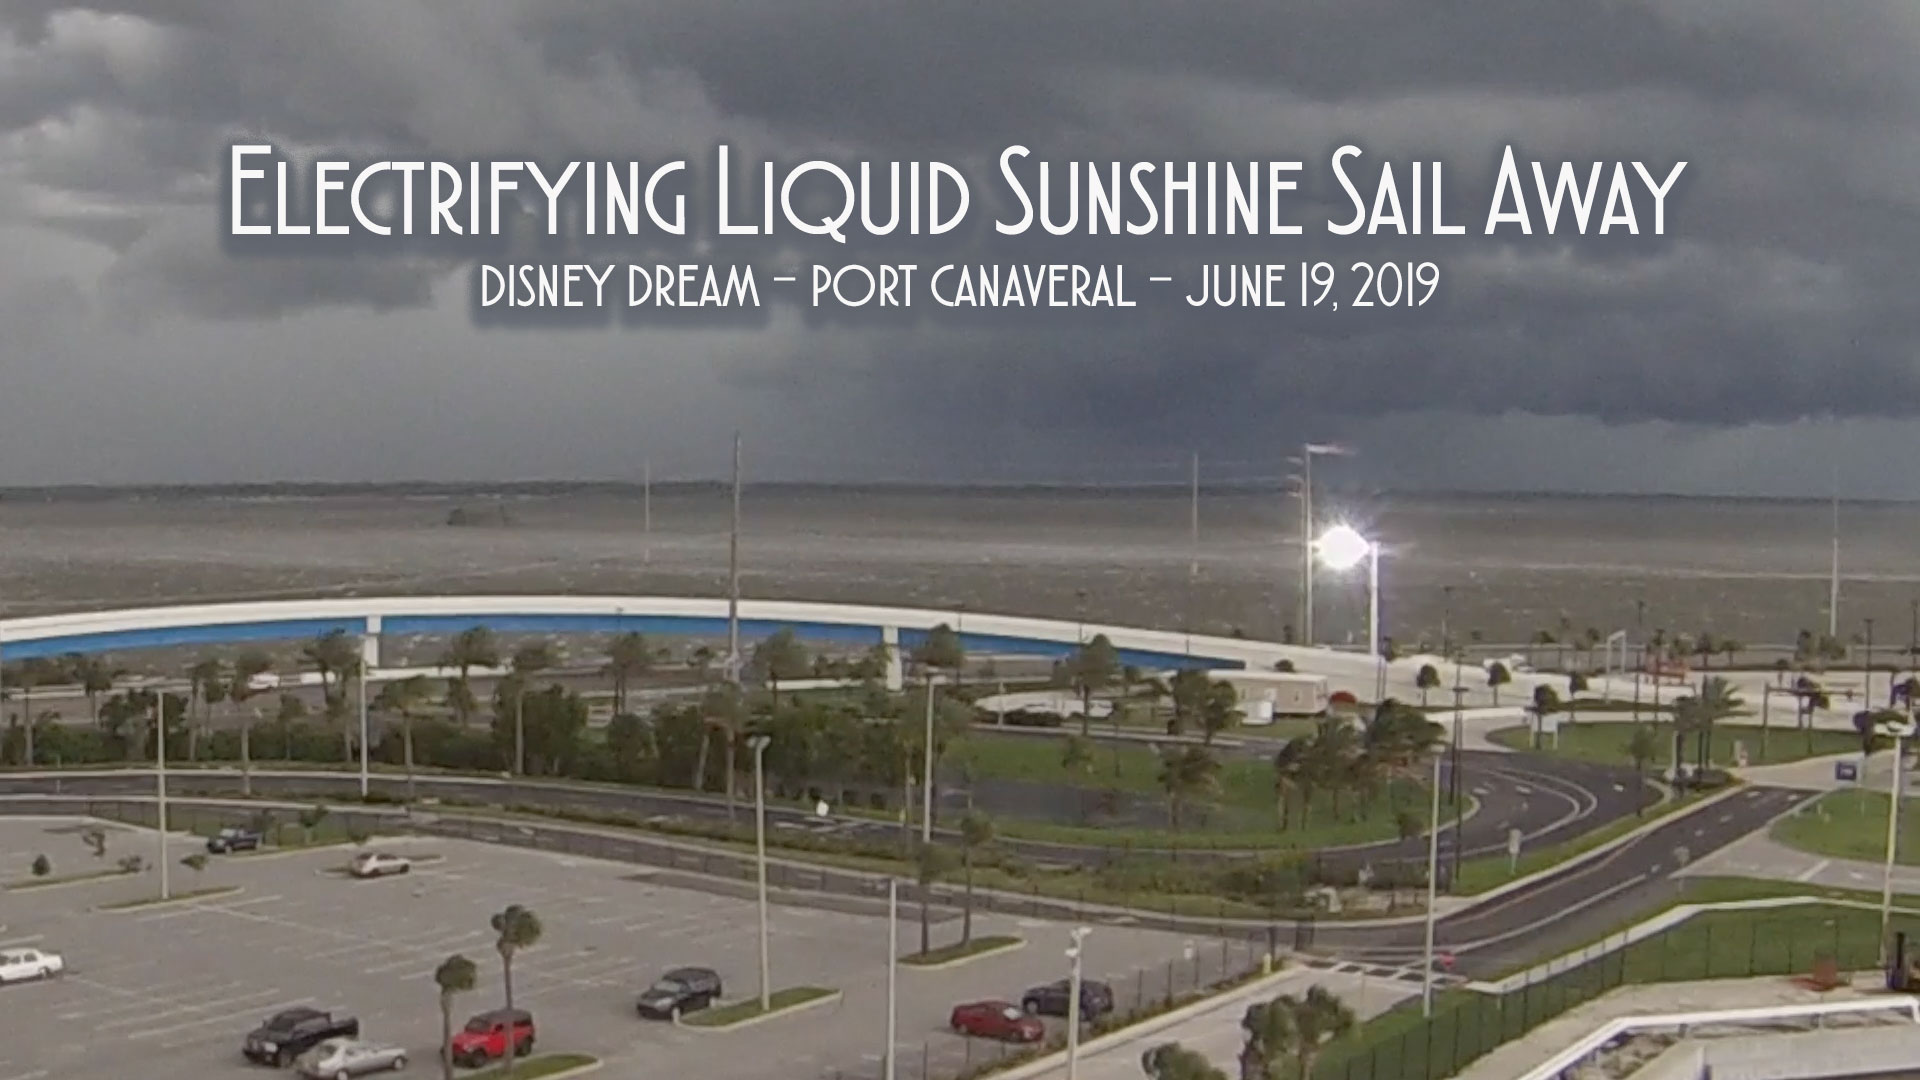 Electrifying Liquid Sunshine Disney Dream Sail Away From Port Canaveral